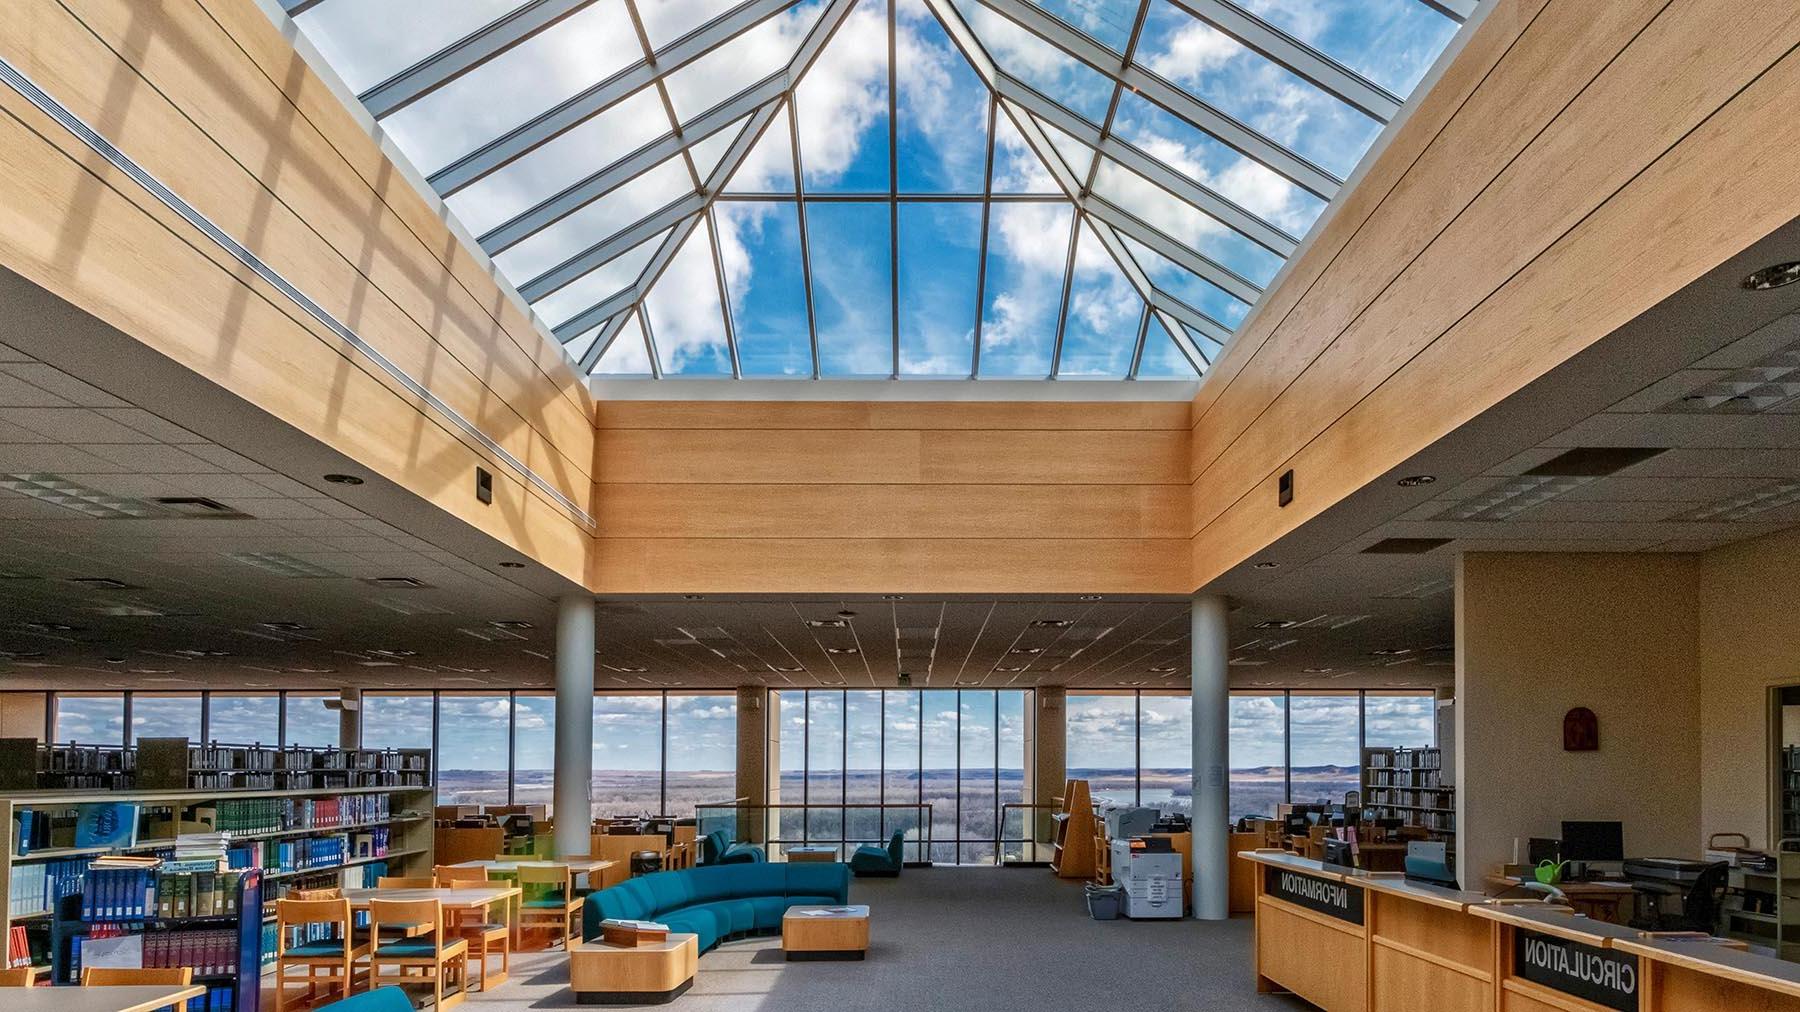 View of the library from the entrance, showcasing large skylight and west wall of windows looking out to Missouri River Valley